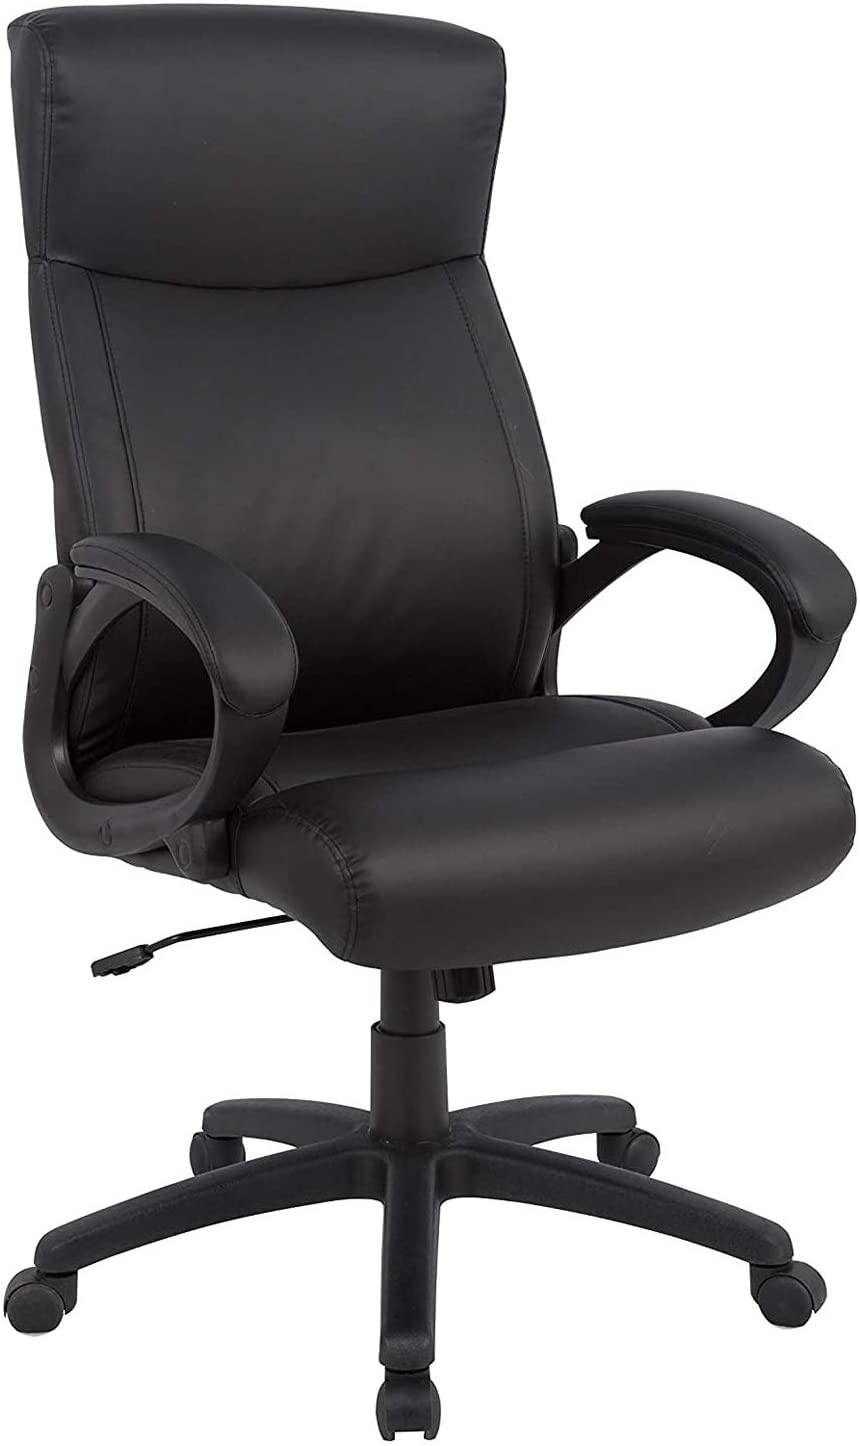 Office Chair Ergonomic Desk Chair with Padded Armrests Executive PU Leather Computer Chair High Back Adjustable Swivel Task Chair with Lumbar Support Black - Trendha